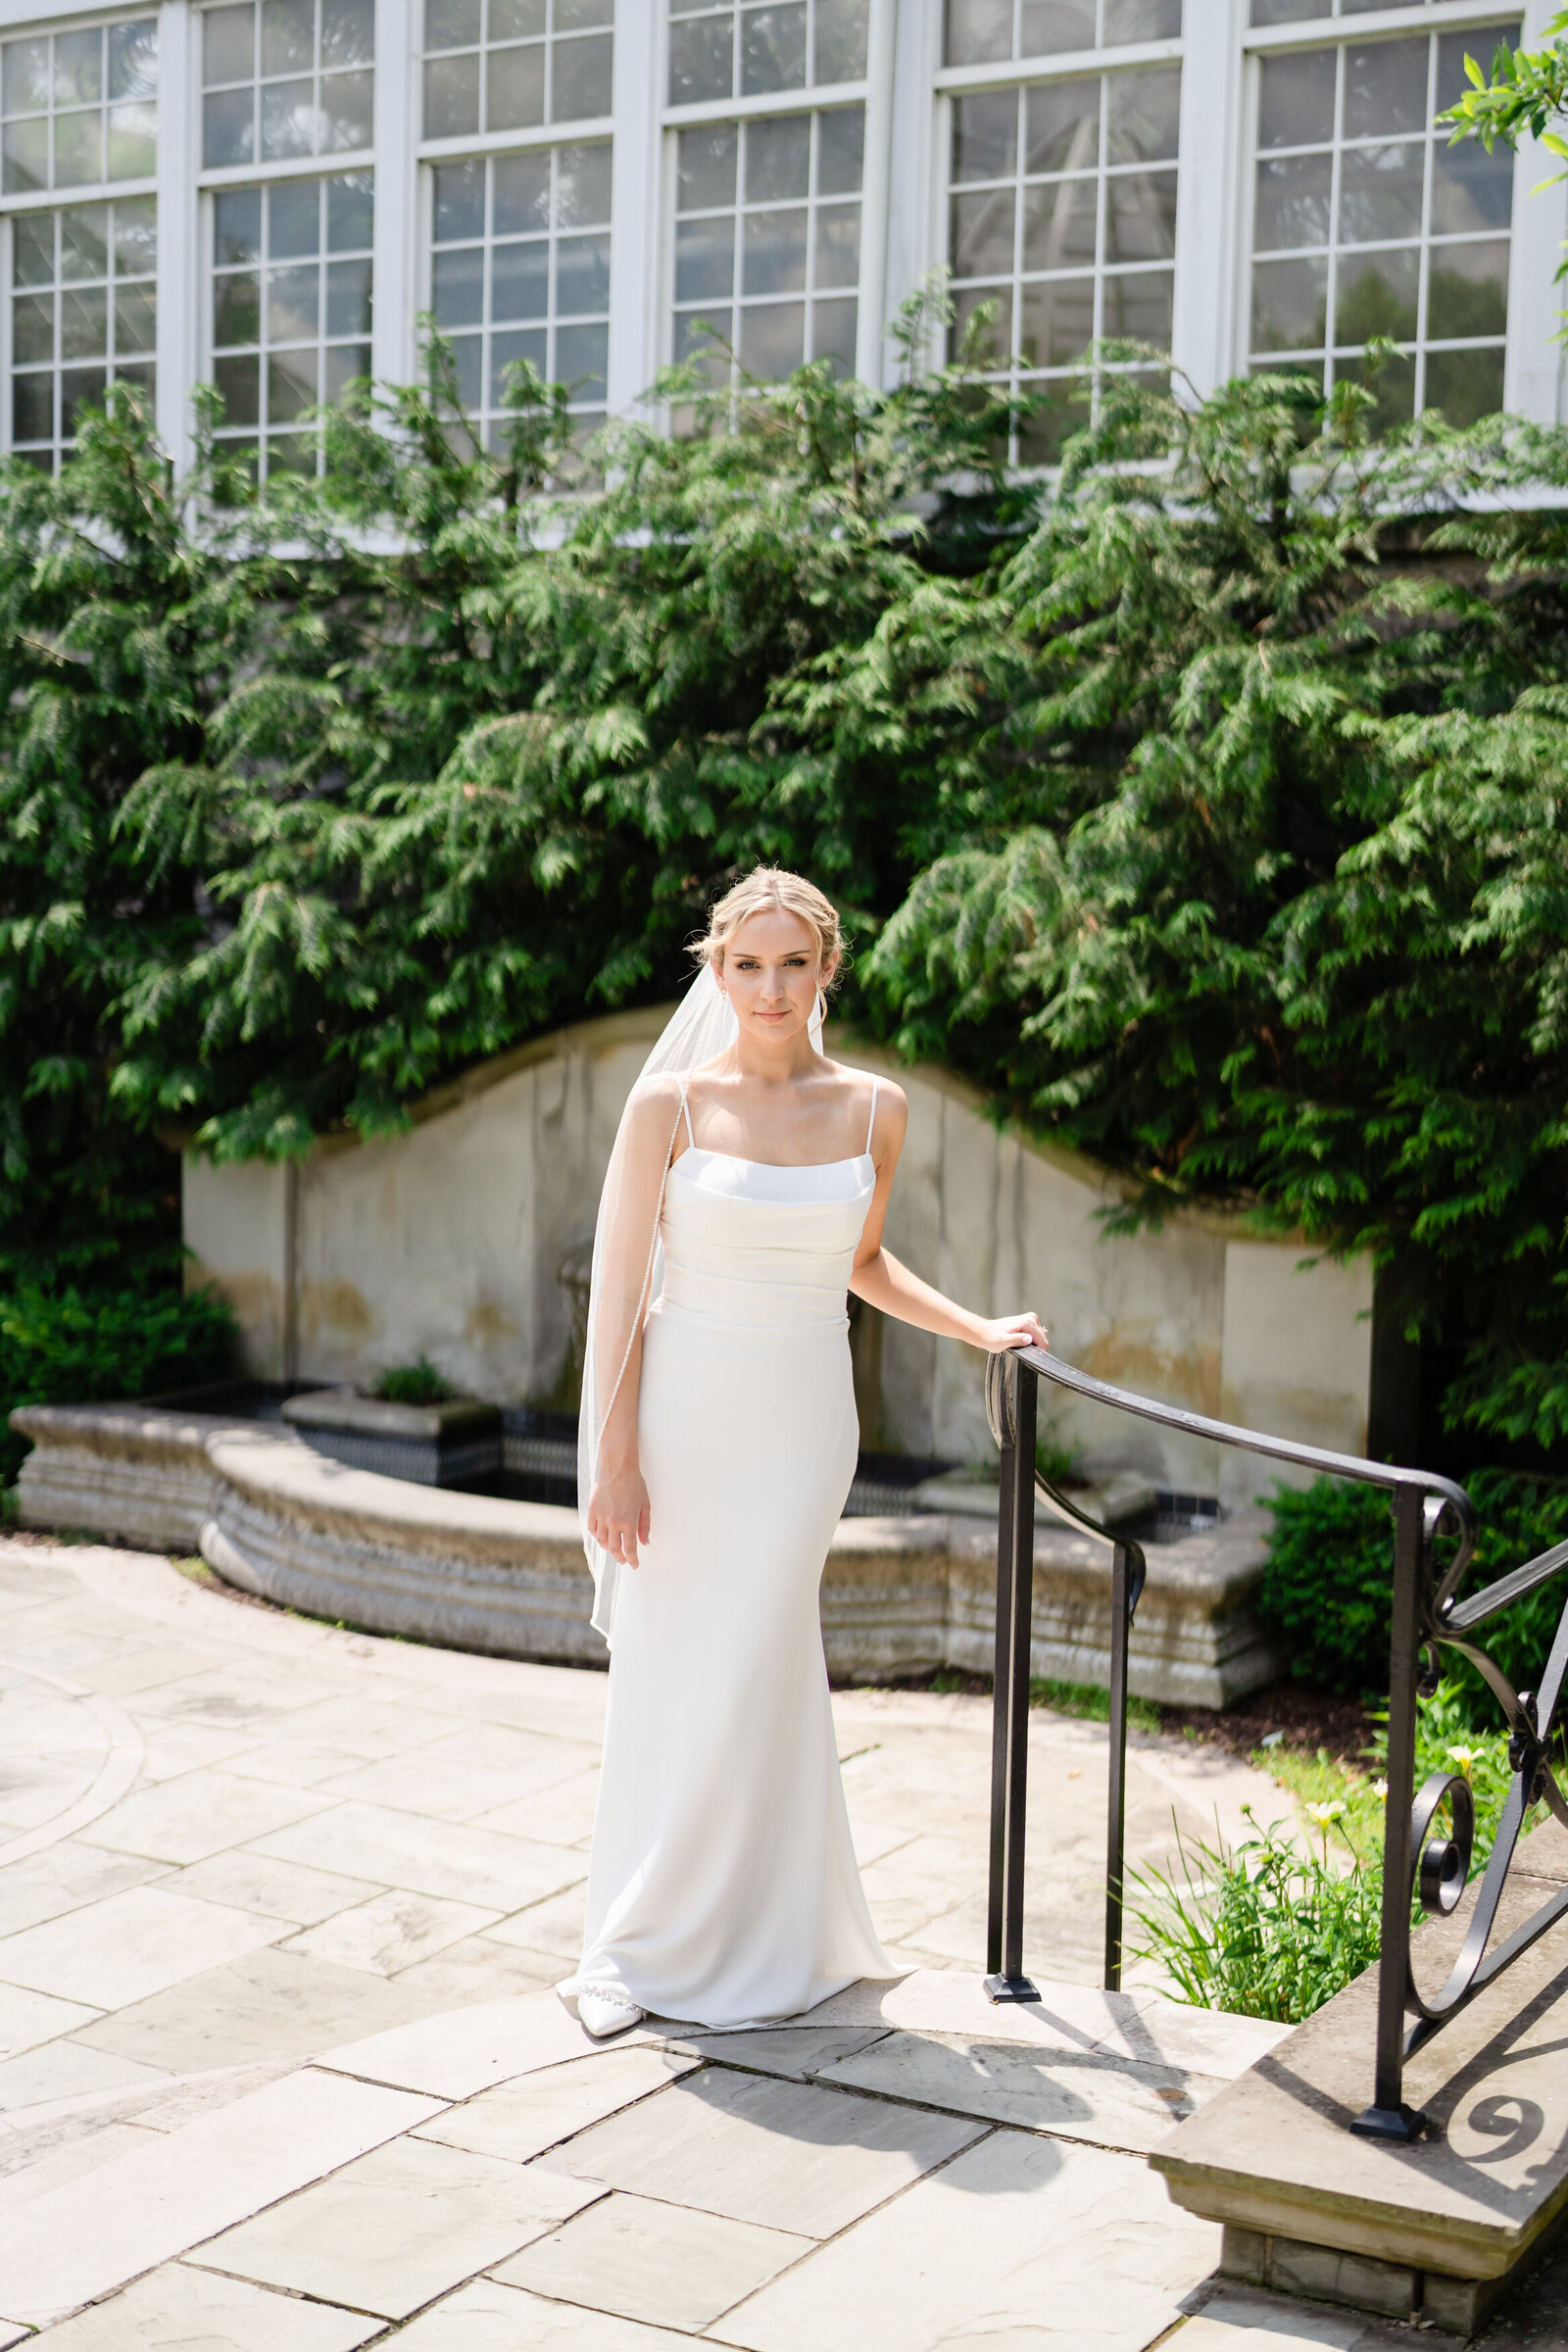 A bride in a white dress holds onto the rail and softly smiles in the Bride's Garden at the Franklin Park Conservatory